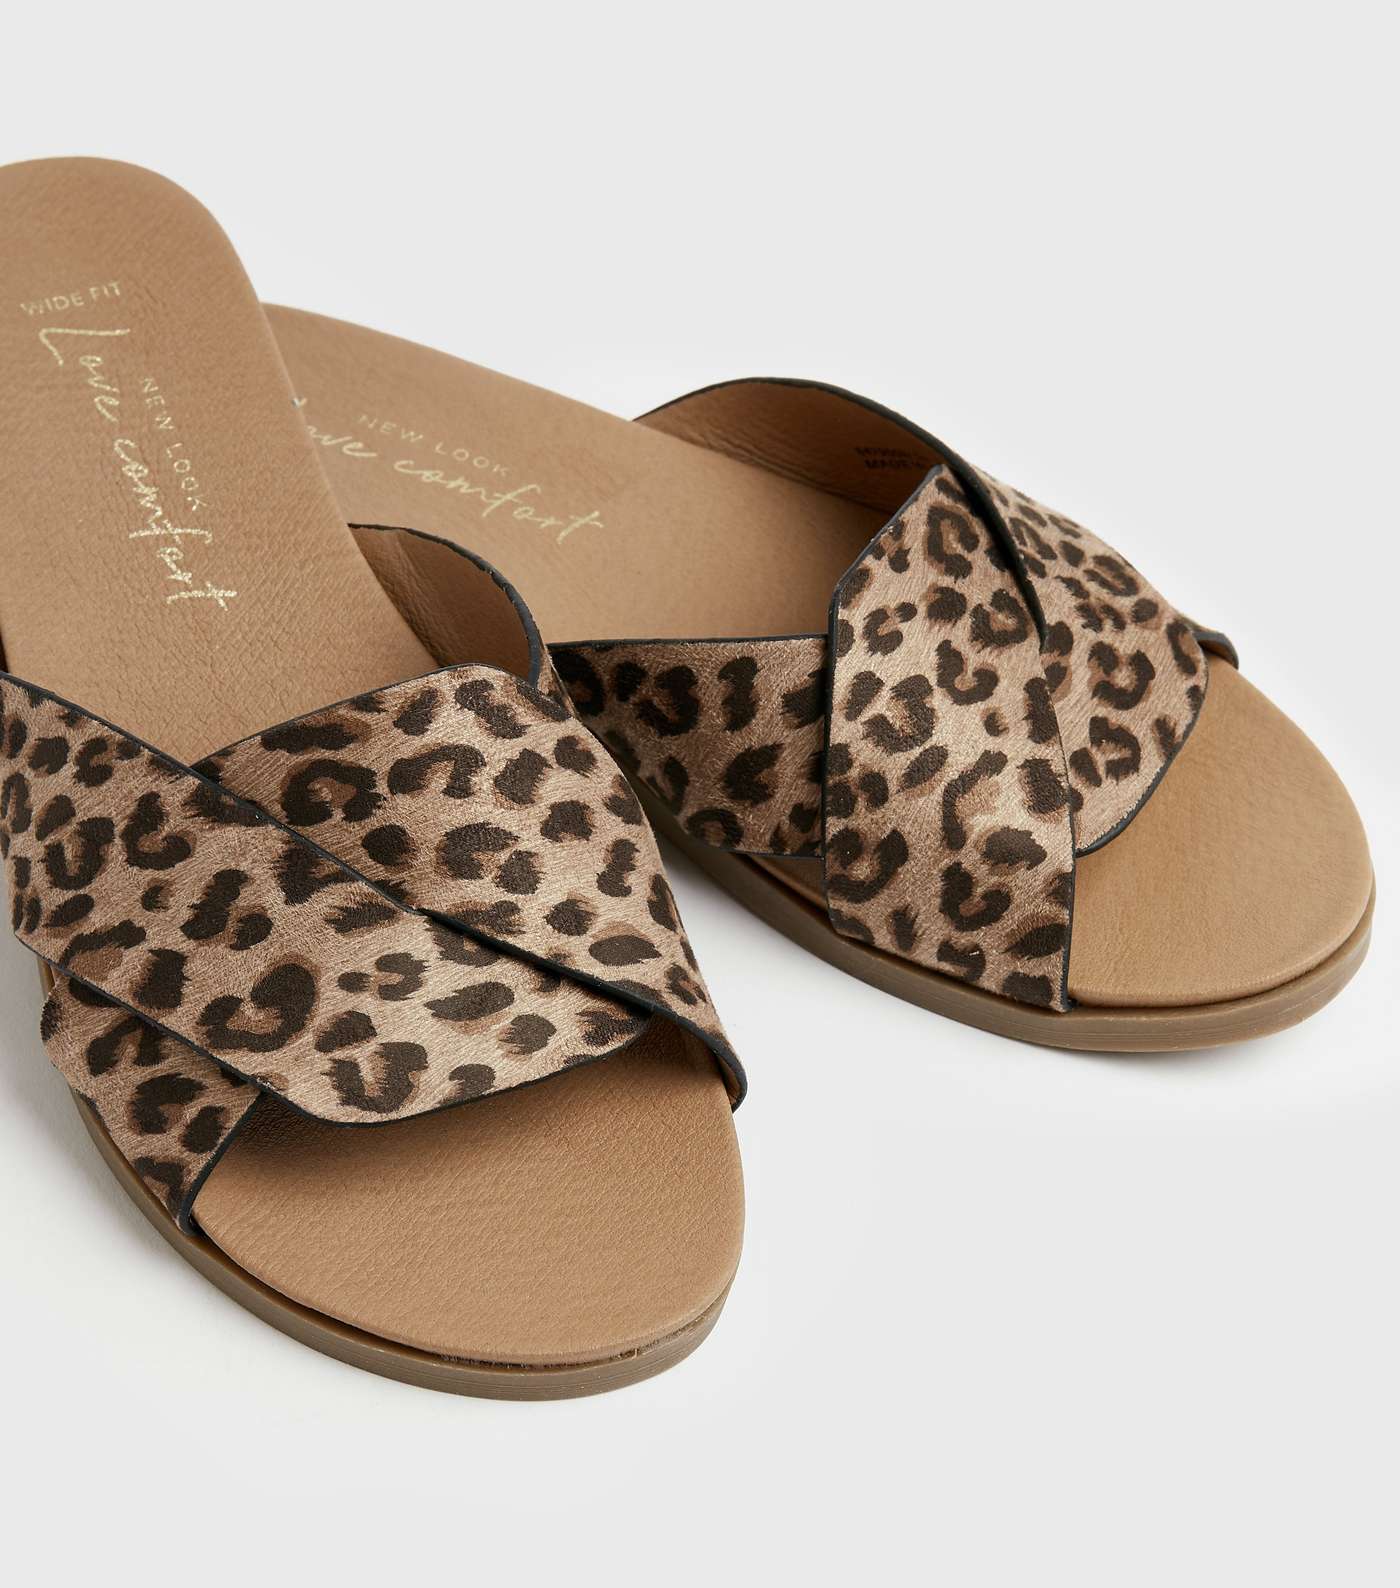 Wide Fit Stone Leopard Print Strap Footbed Sliders Image 4